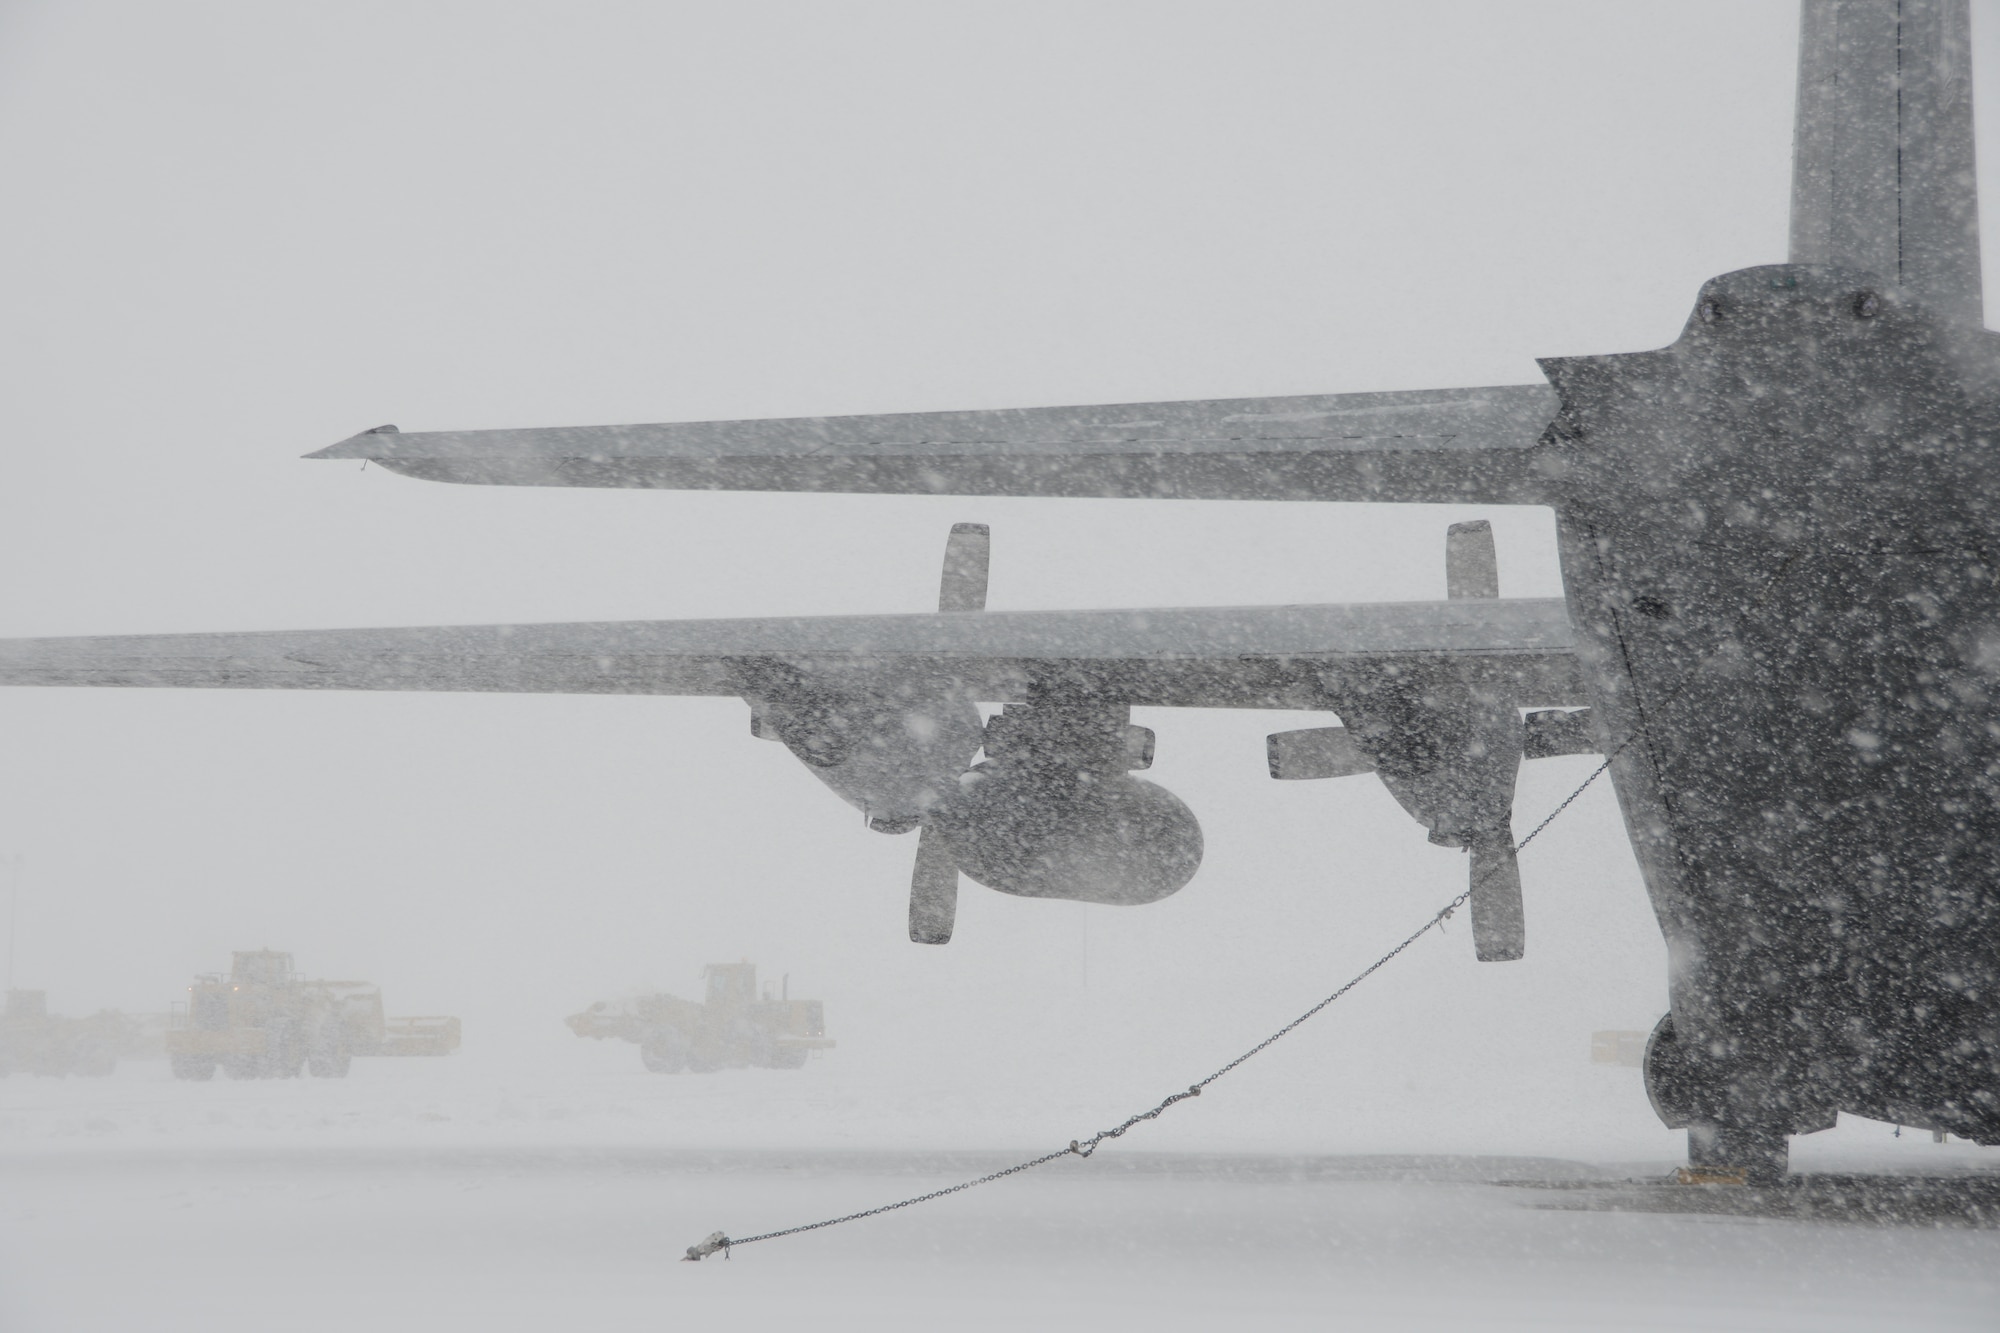 A C-130H aircraft assigned to the 103rd Airlift Wing weathers the storm during near whiteout conditions at Bradley Air National Guard Base, East Granby, Conn., as plows work to clear the flightline of the rapidly accumulating snow from a nor’easter Feb. 13, 2014. More than 200 Airmen reported to work here and at the Orange Air National Guard Station, ready to answer the call in the event the state required assistance during the height of the storm. (U.S. Air National Guard photo by Maj. Bryon M. Turner)